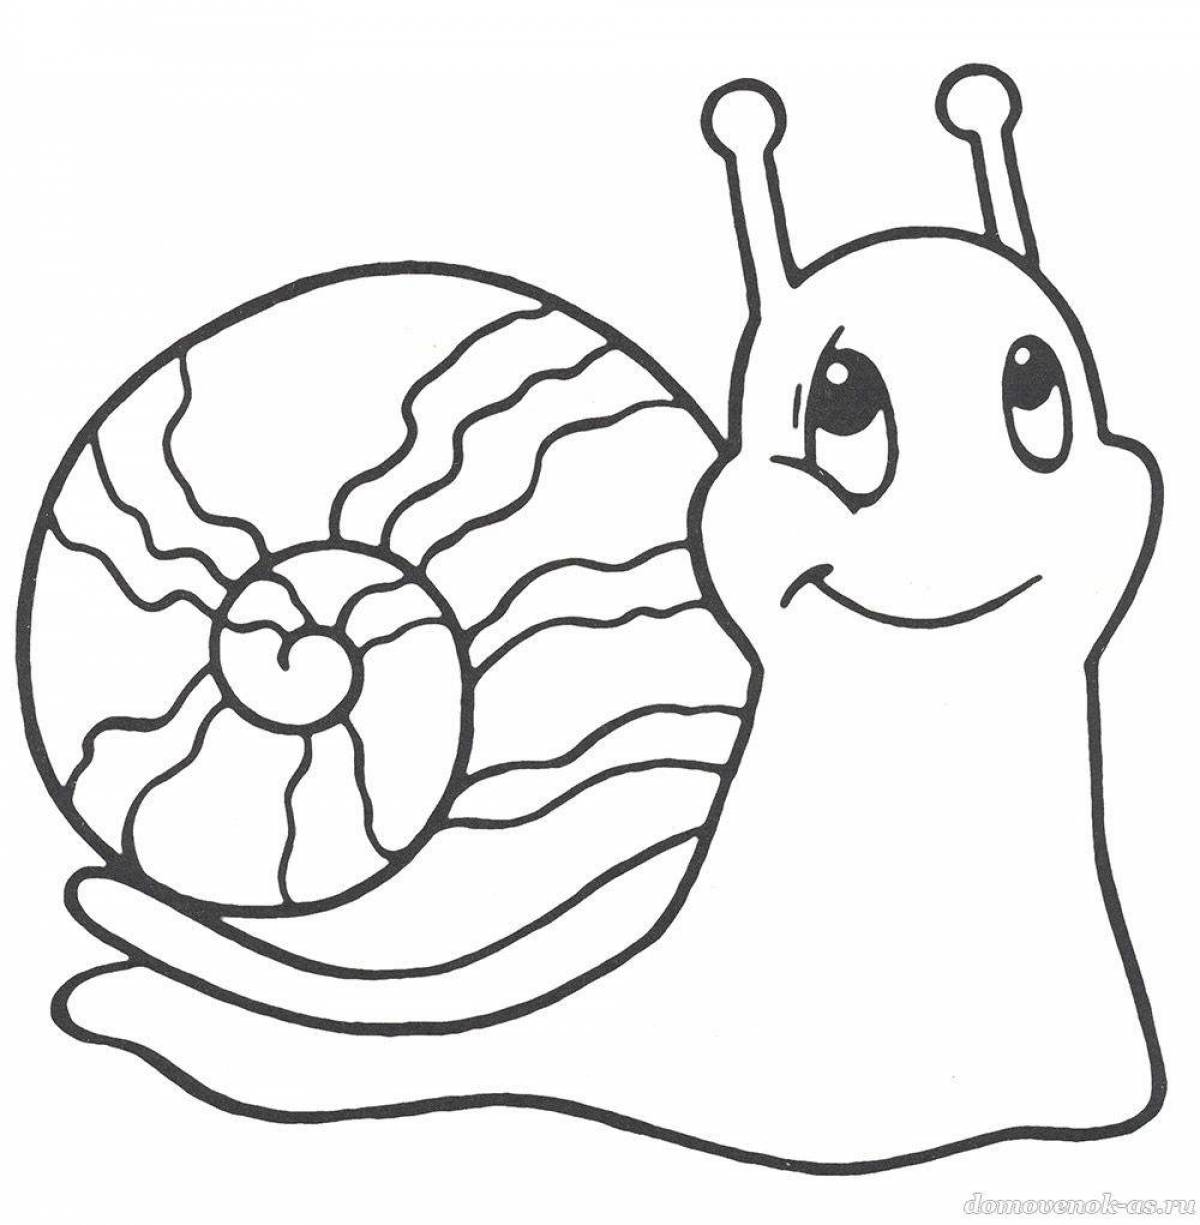 Amazing snail coloring pages for kids